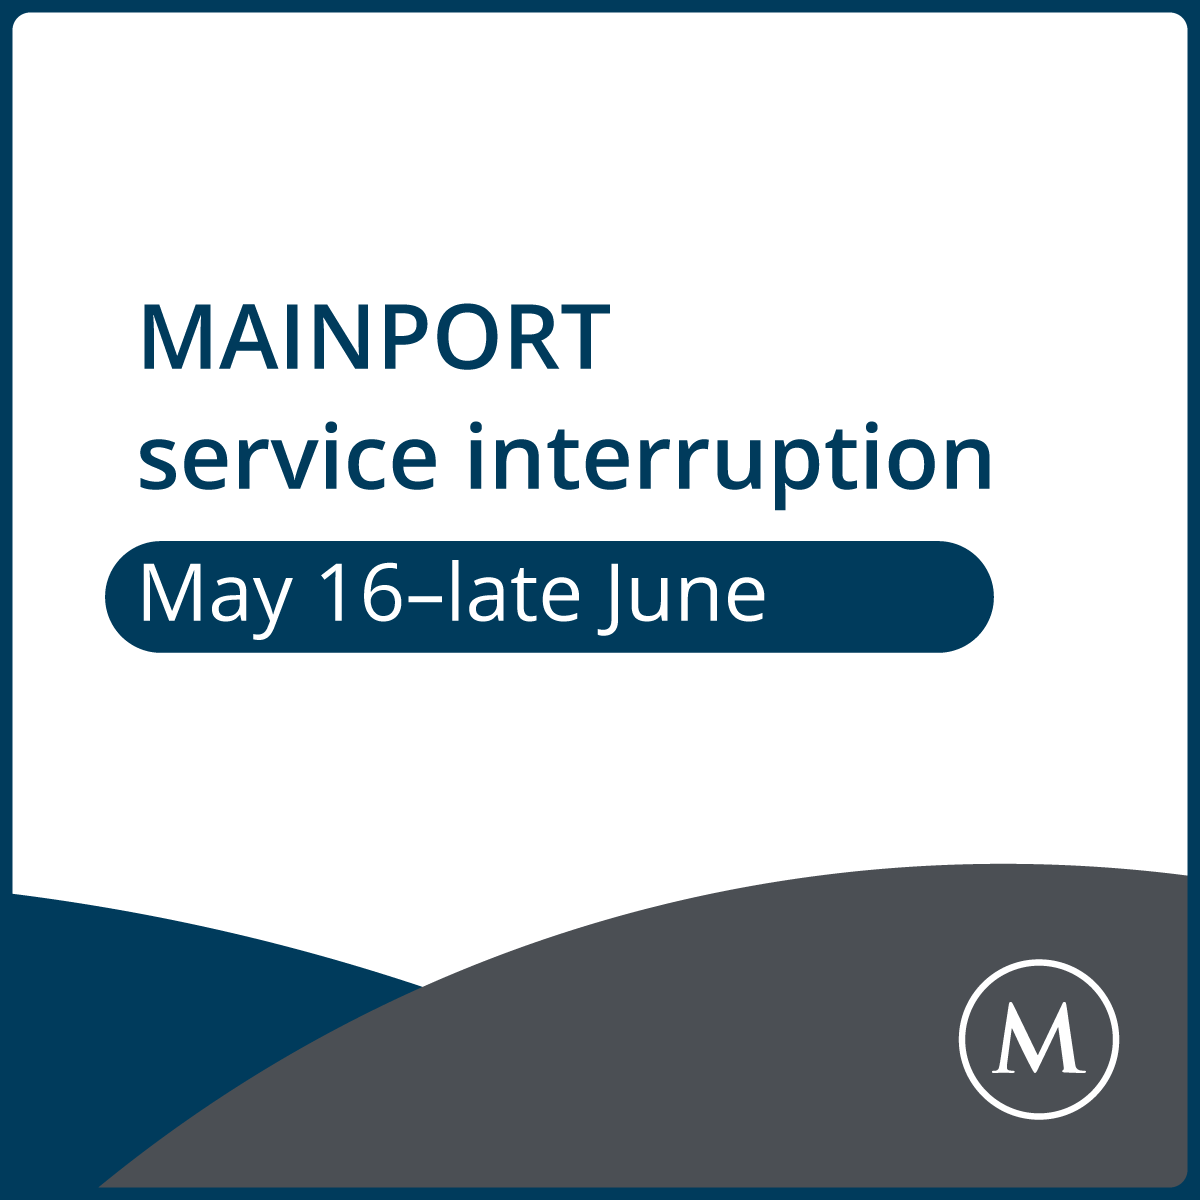 MAINPORT service interruption May 16 to late June